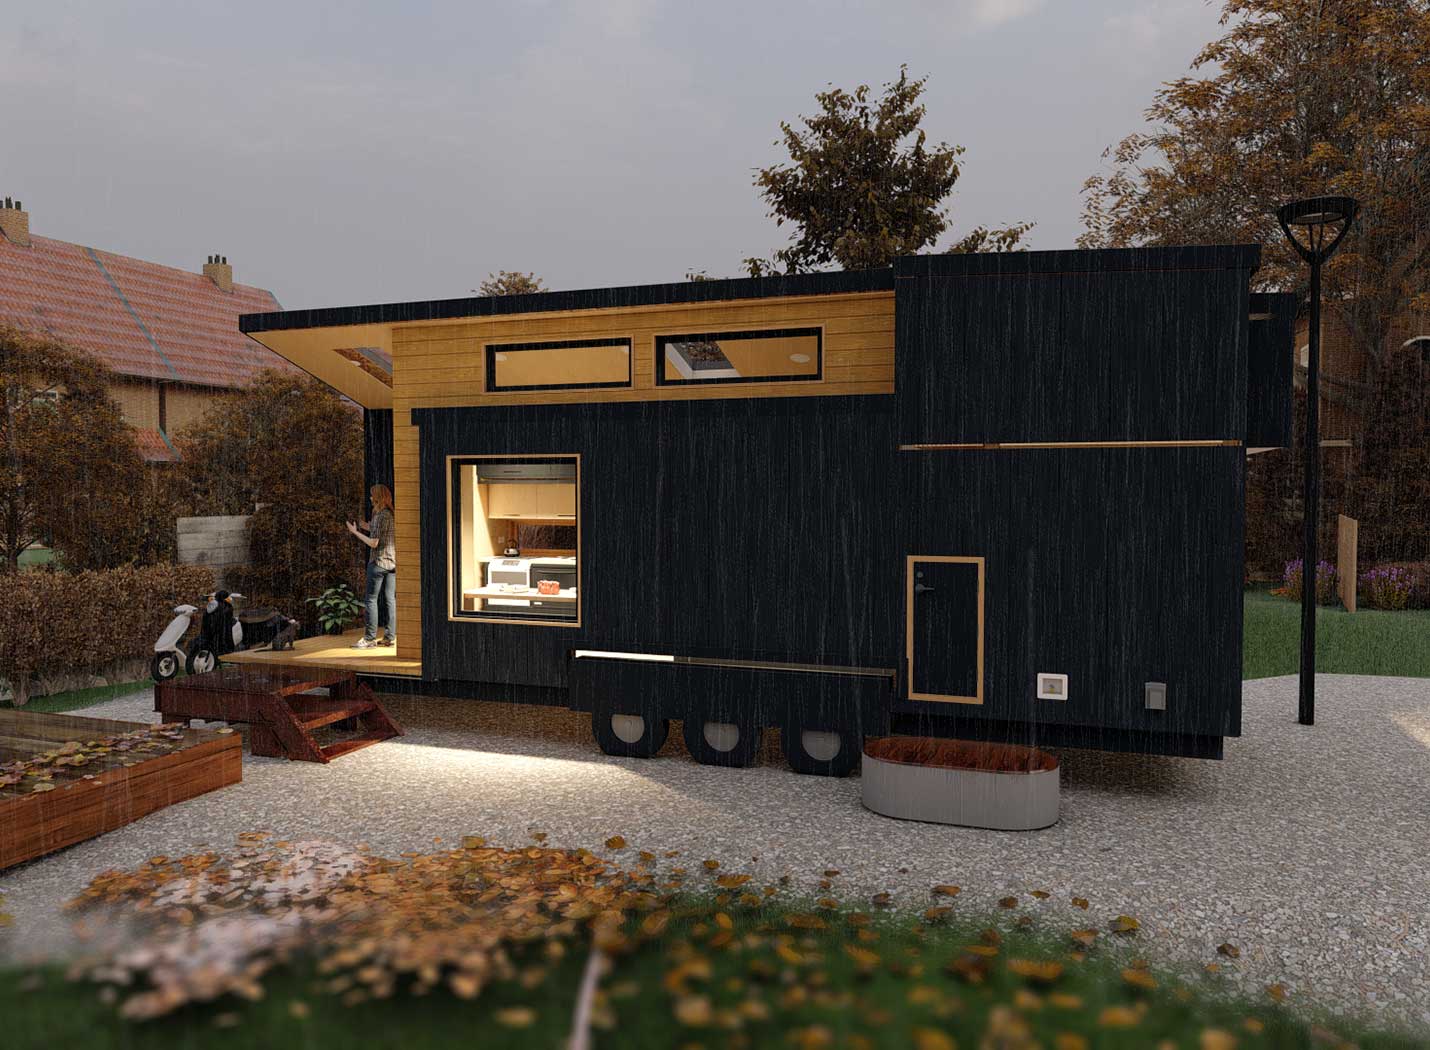 3D model of the exterior of the Journey Tiny Home for sale as part of Tiny Heirloom's Signature Series of tiny house models